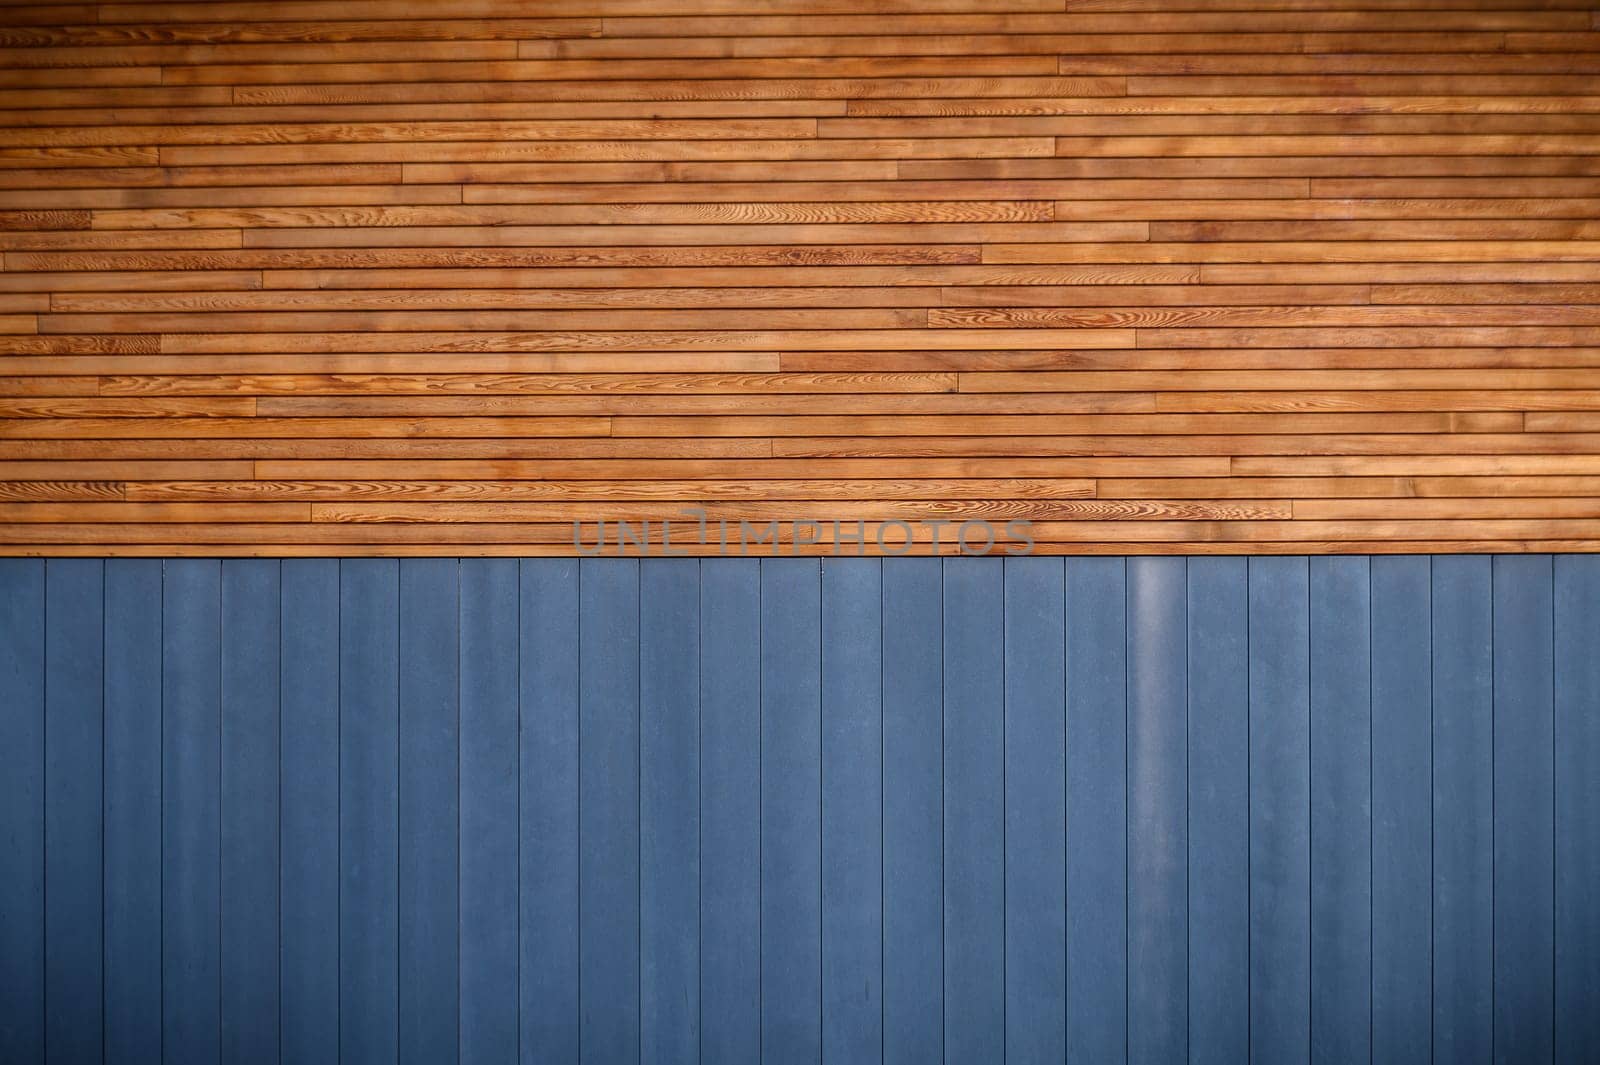 blue metal siding and wooden boards on the facade as a background 7 by Mixa74